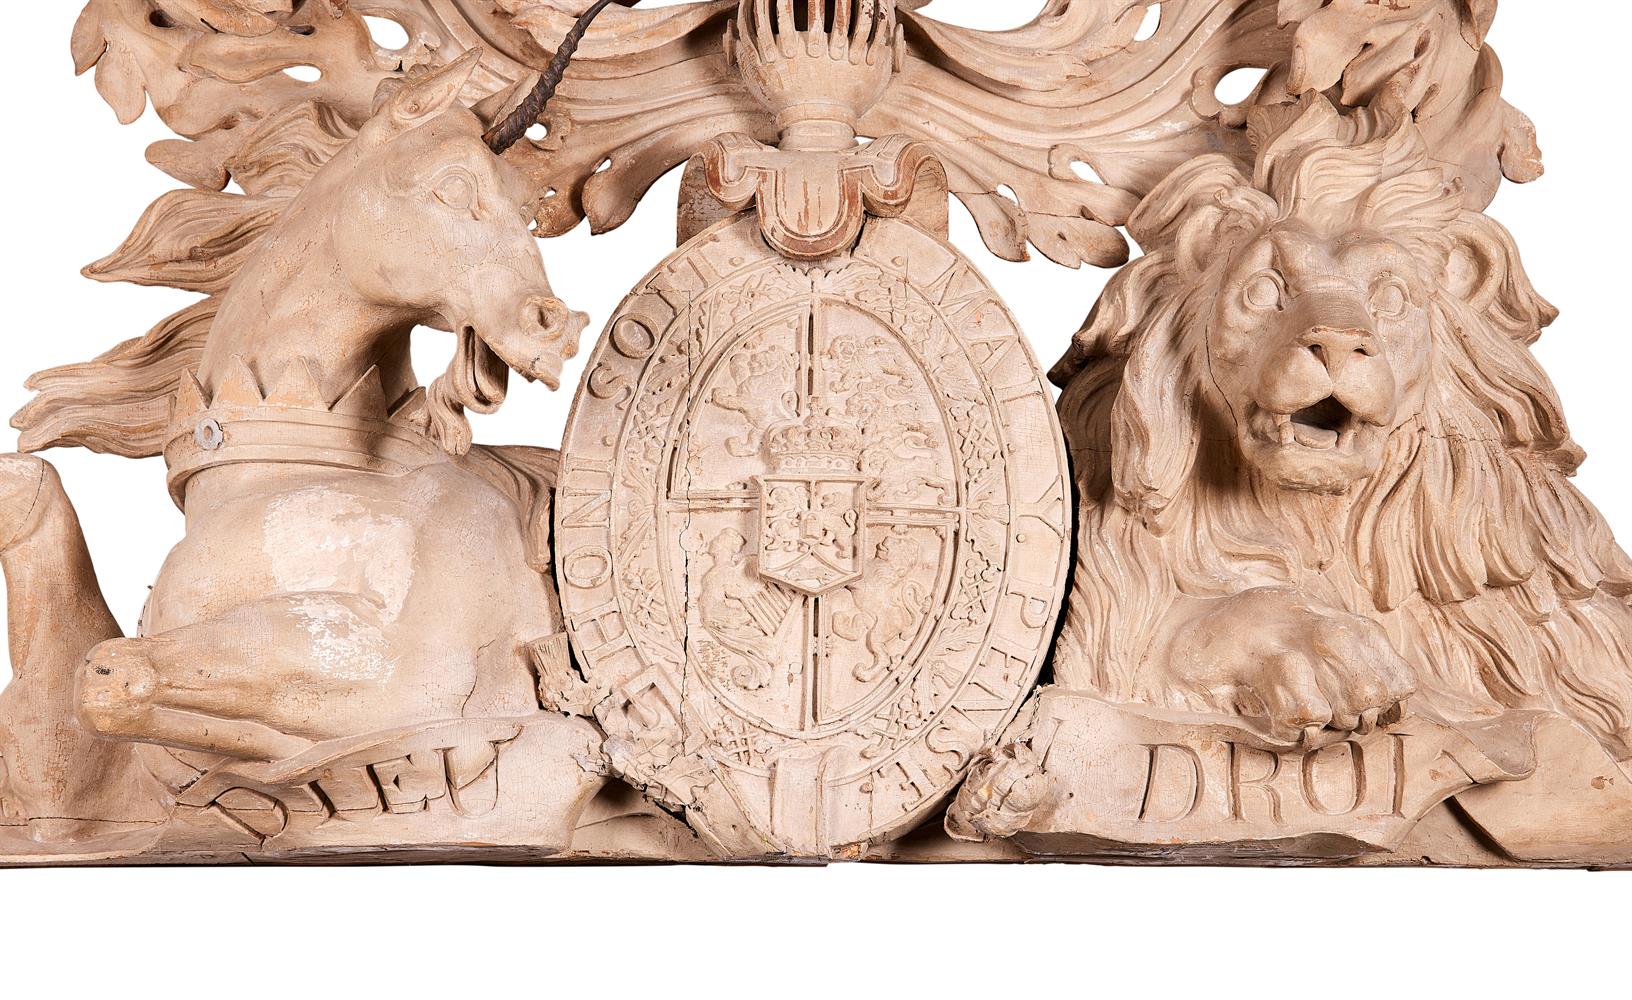 A RARE AND IMPRESSIVE REGENCY CARVED AND PAINTED WOOD SCOTTISH ROYAL COAT OF ARMS BY JOHN STEELL SNR - Image 2 of 7